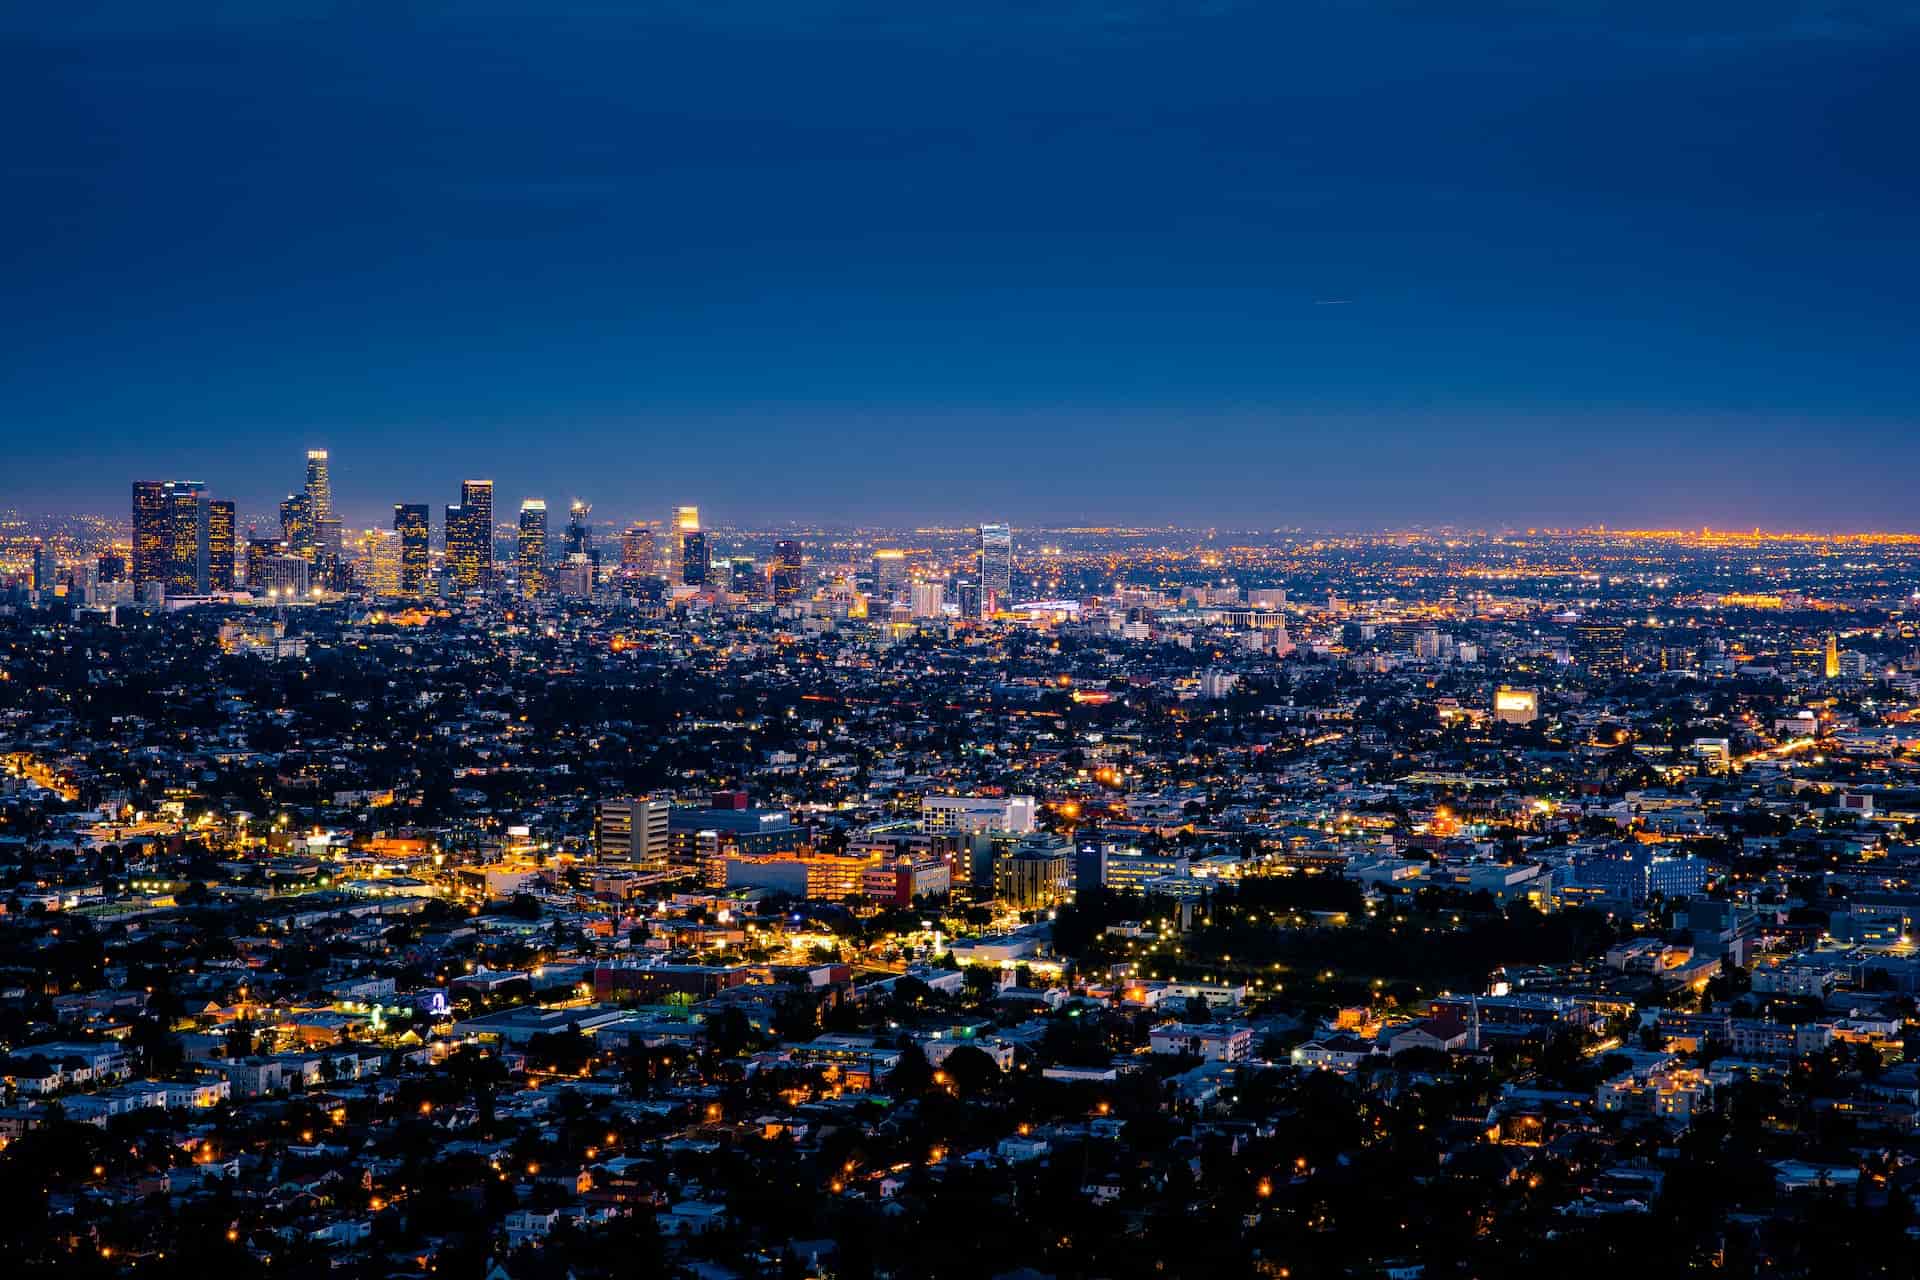 Los Angeles, USA: Modernism in the City of Angels